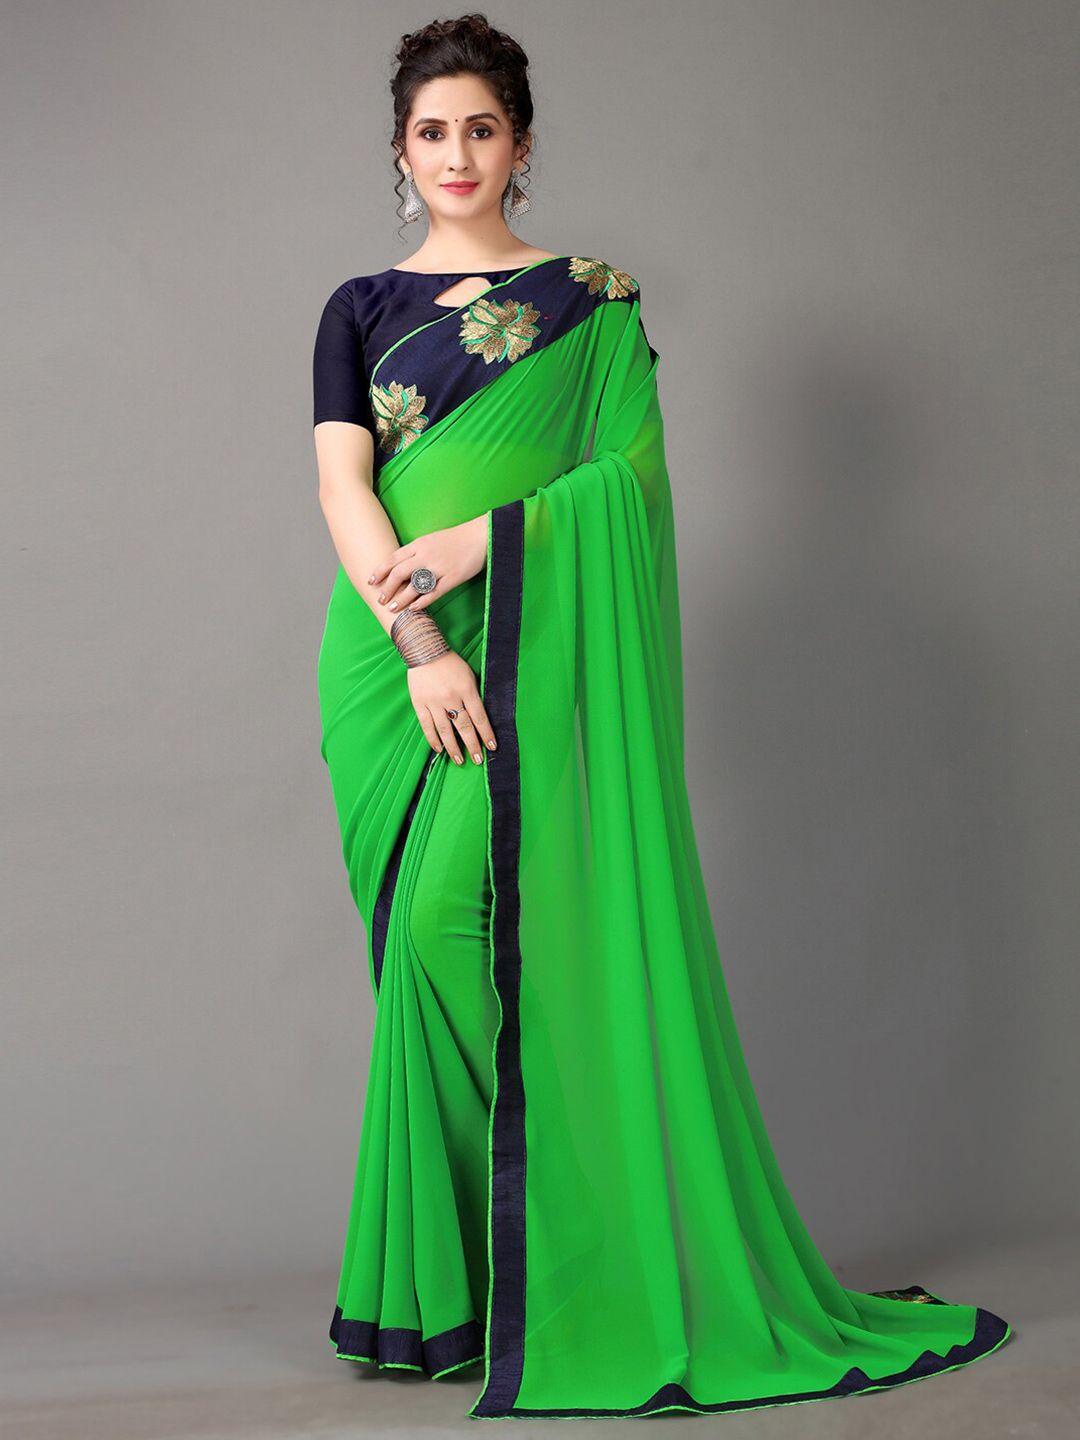 kalini-saree-with-embroidered-border